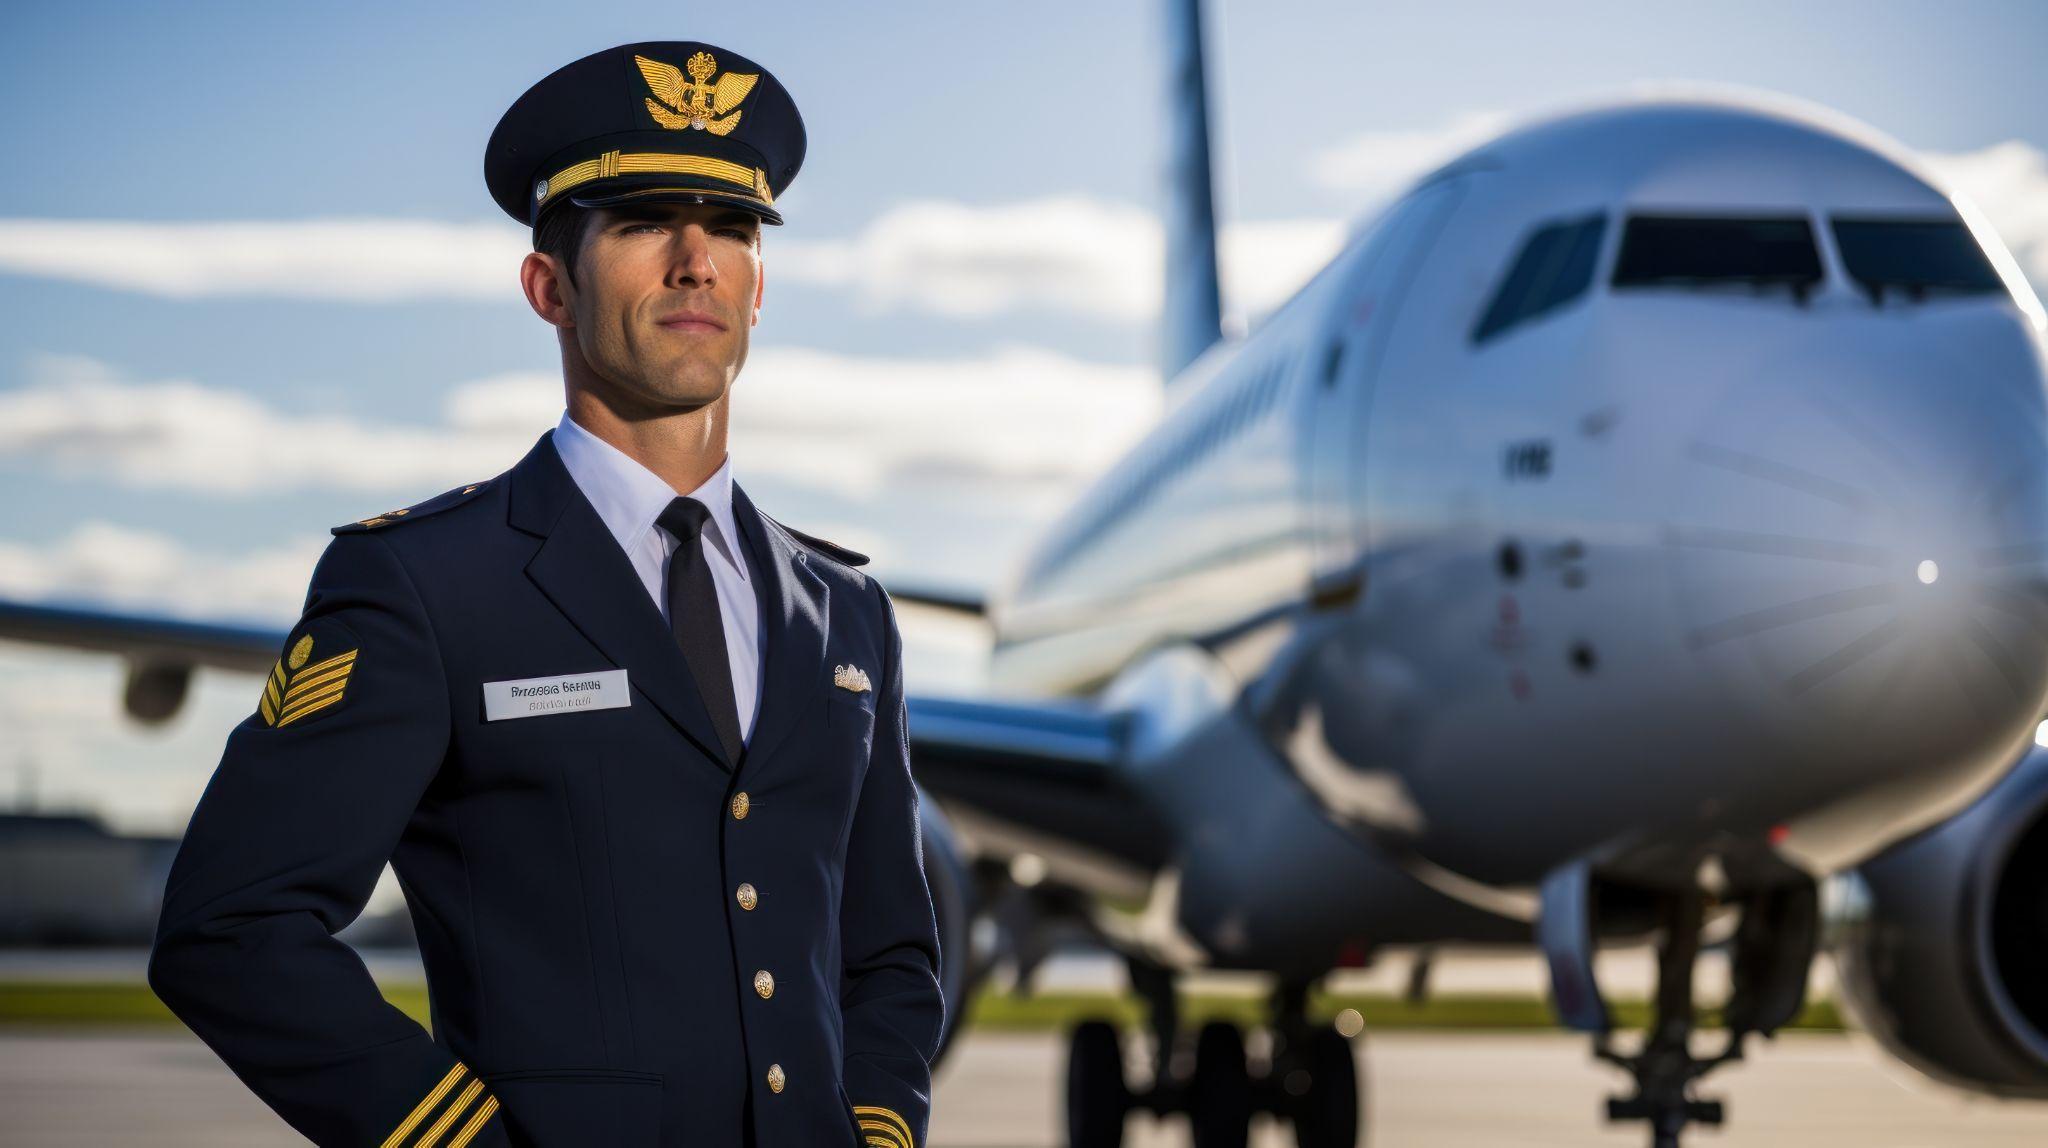 Airline Captain smiling standing in airfield with airplane on background.